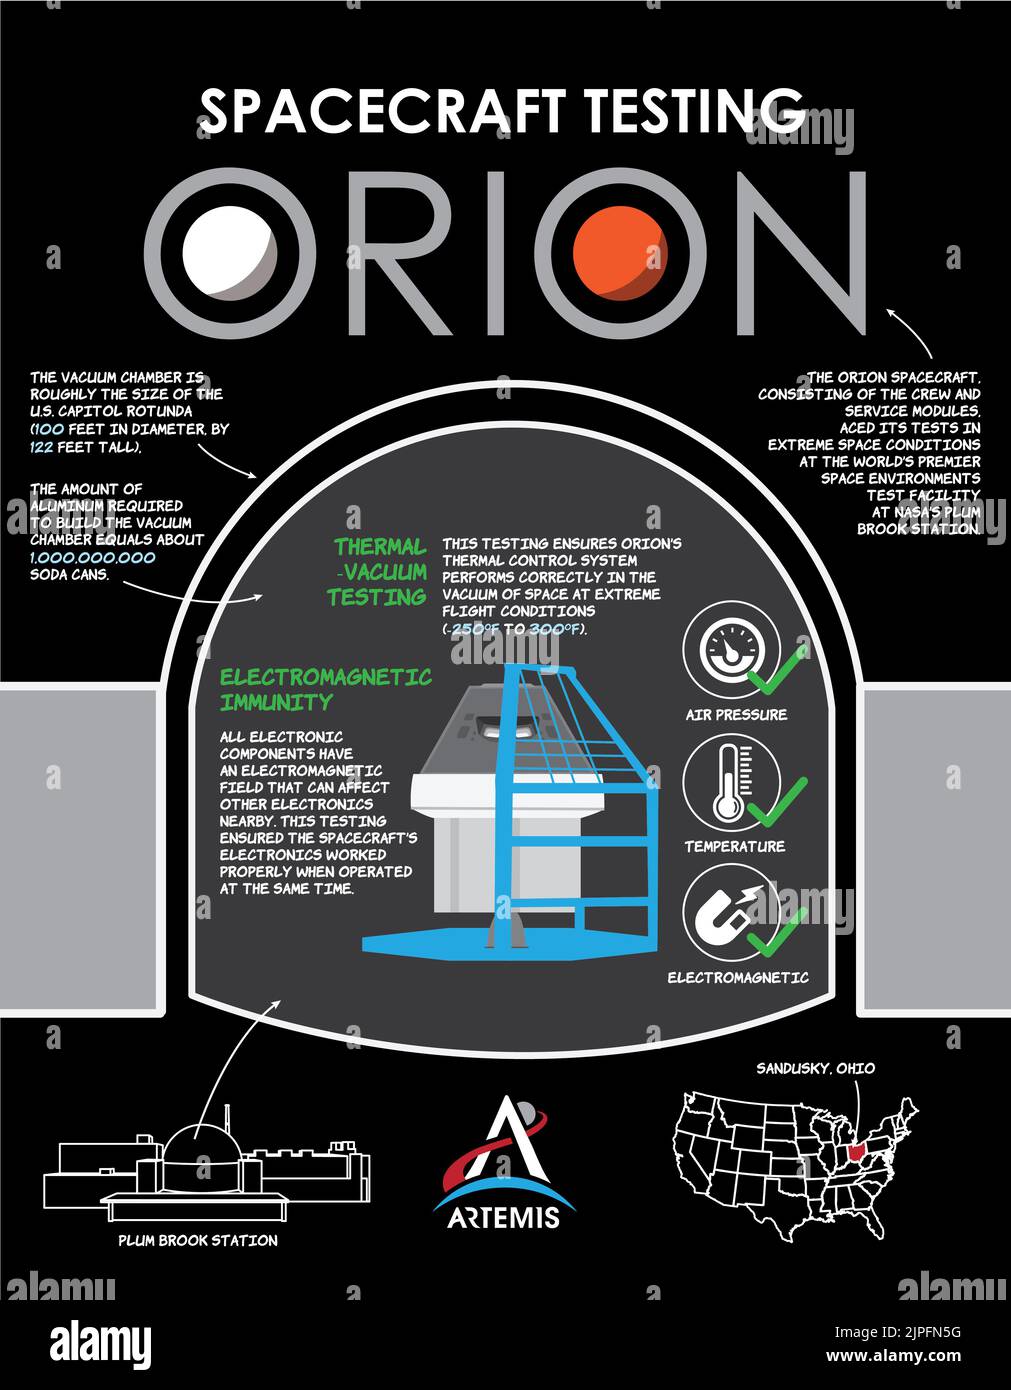 Kennedy Space Center, Florida, USA. 25th Feb, 2021. The Orion spacecraft, consisting of the crew module and European-built service module, has undergone more than three months of testing at NASA's Plum Brook Station in Sandusky, Ohio, where it was subjected to the extreme temperatures and electromagnetic environment it will experience in the vacuum of space during Artemis missions. In late-March, Orion will be transported by NASA's Super Guppy aircraft back to Kennedy Space Center in Florida for final testing and processing, including integration with the Space Launch System rocket. Orion Stock Photo